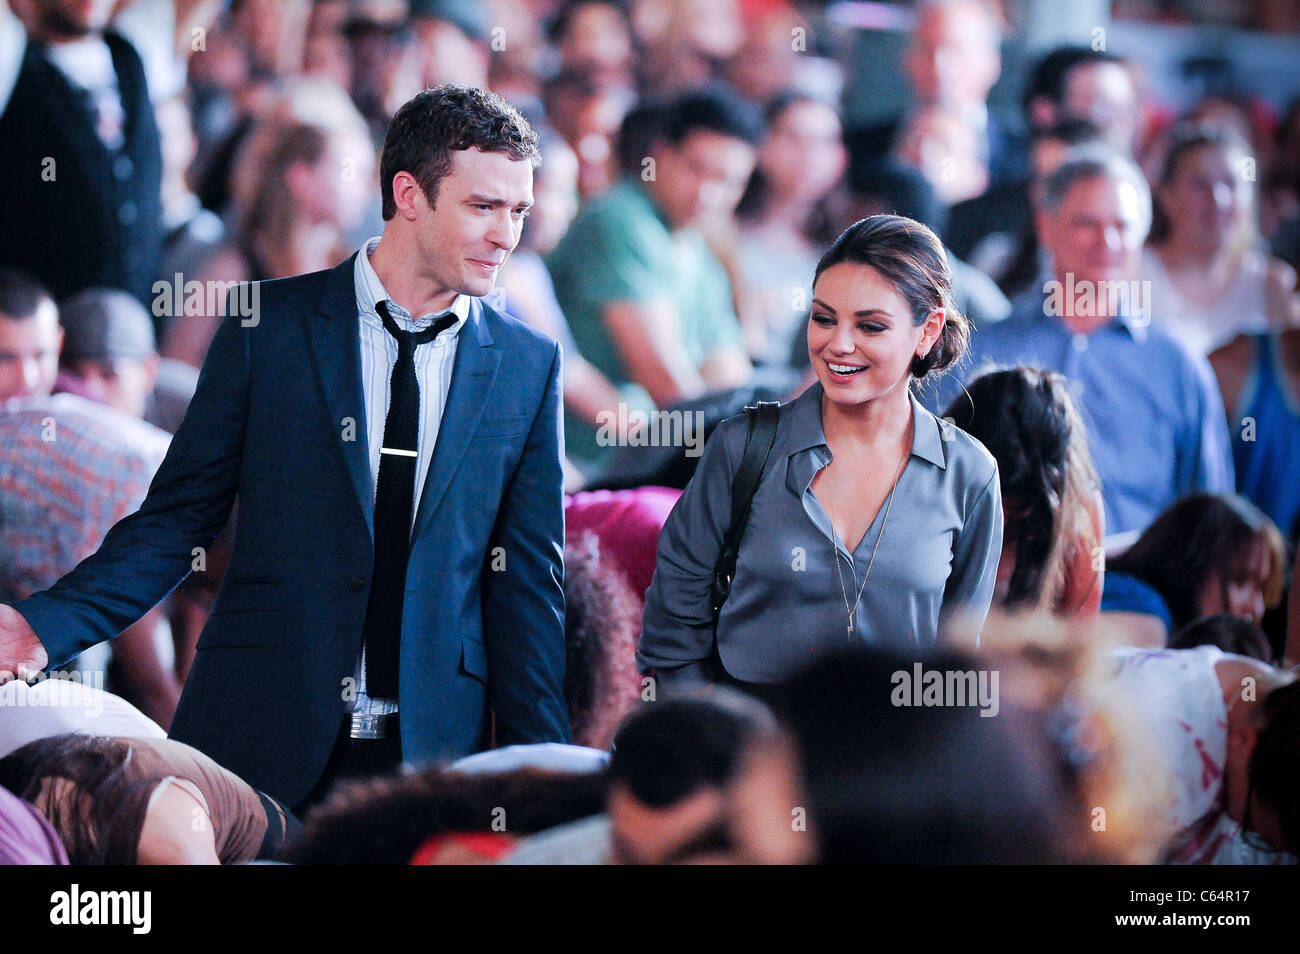 Justin Timberlake, Mila Kunis, film a scene at the 'Friends With Benefits' film set in Times Square out and about for CELEBRITY Stock Photo